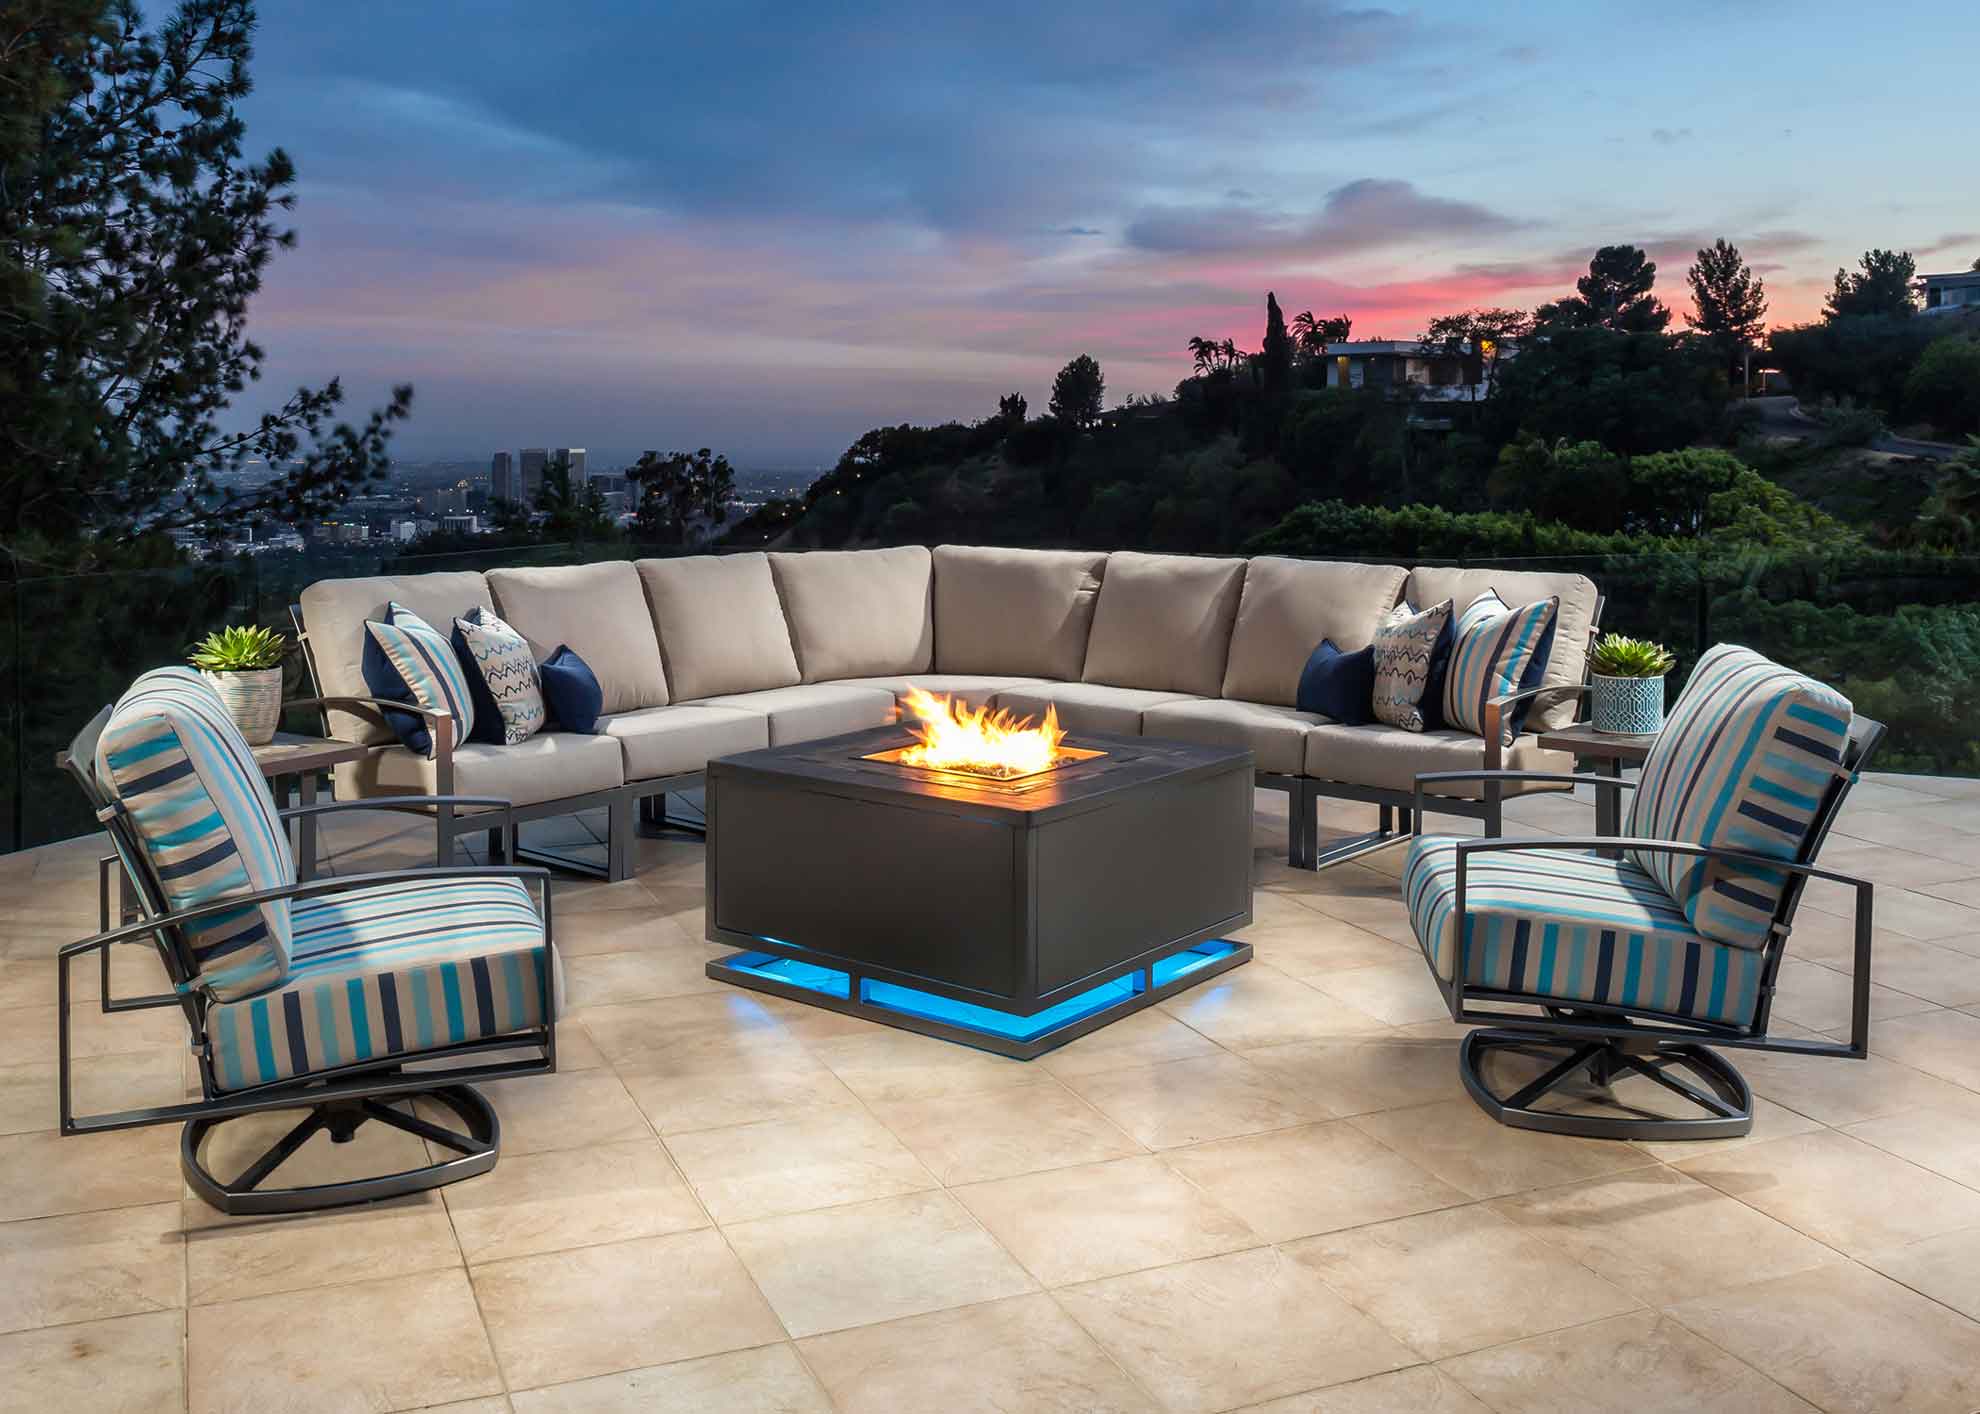 Outdoor Patio Furniture Sets for Sale Near Me - Sam's Club